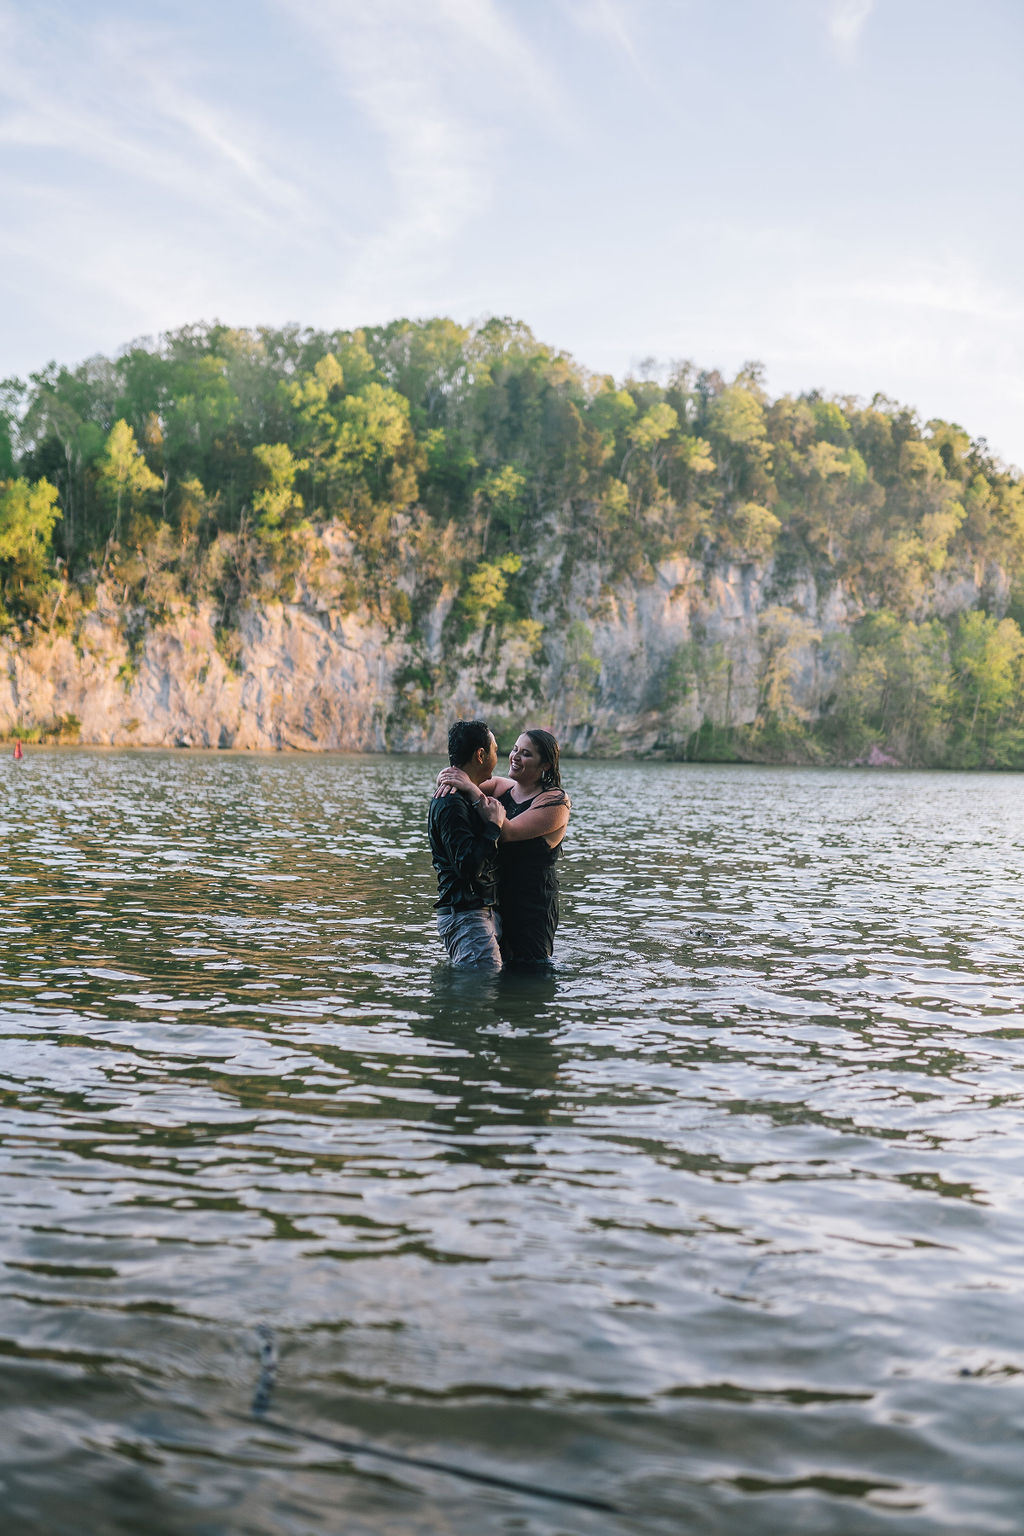 engagement session in Meads Quarry with man and woman in the water holding each other and laughing with a cliff and trees behind them